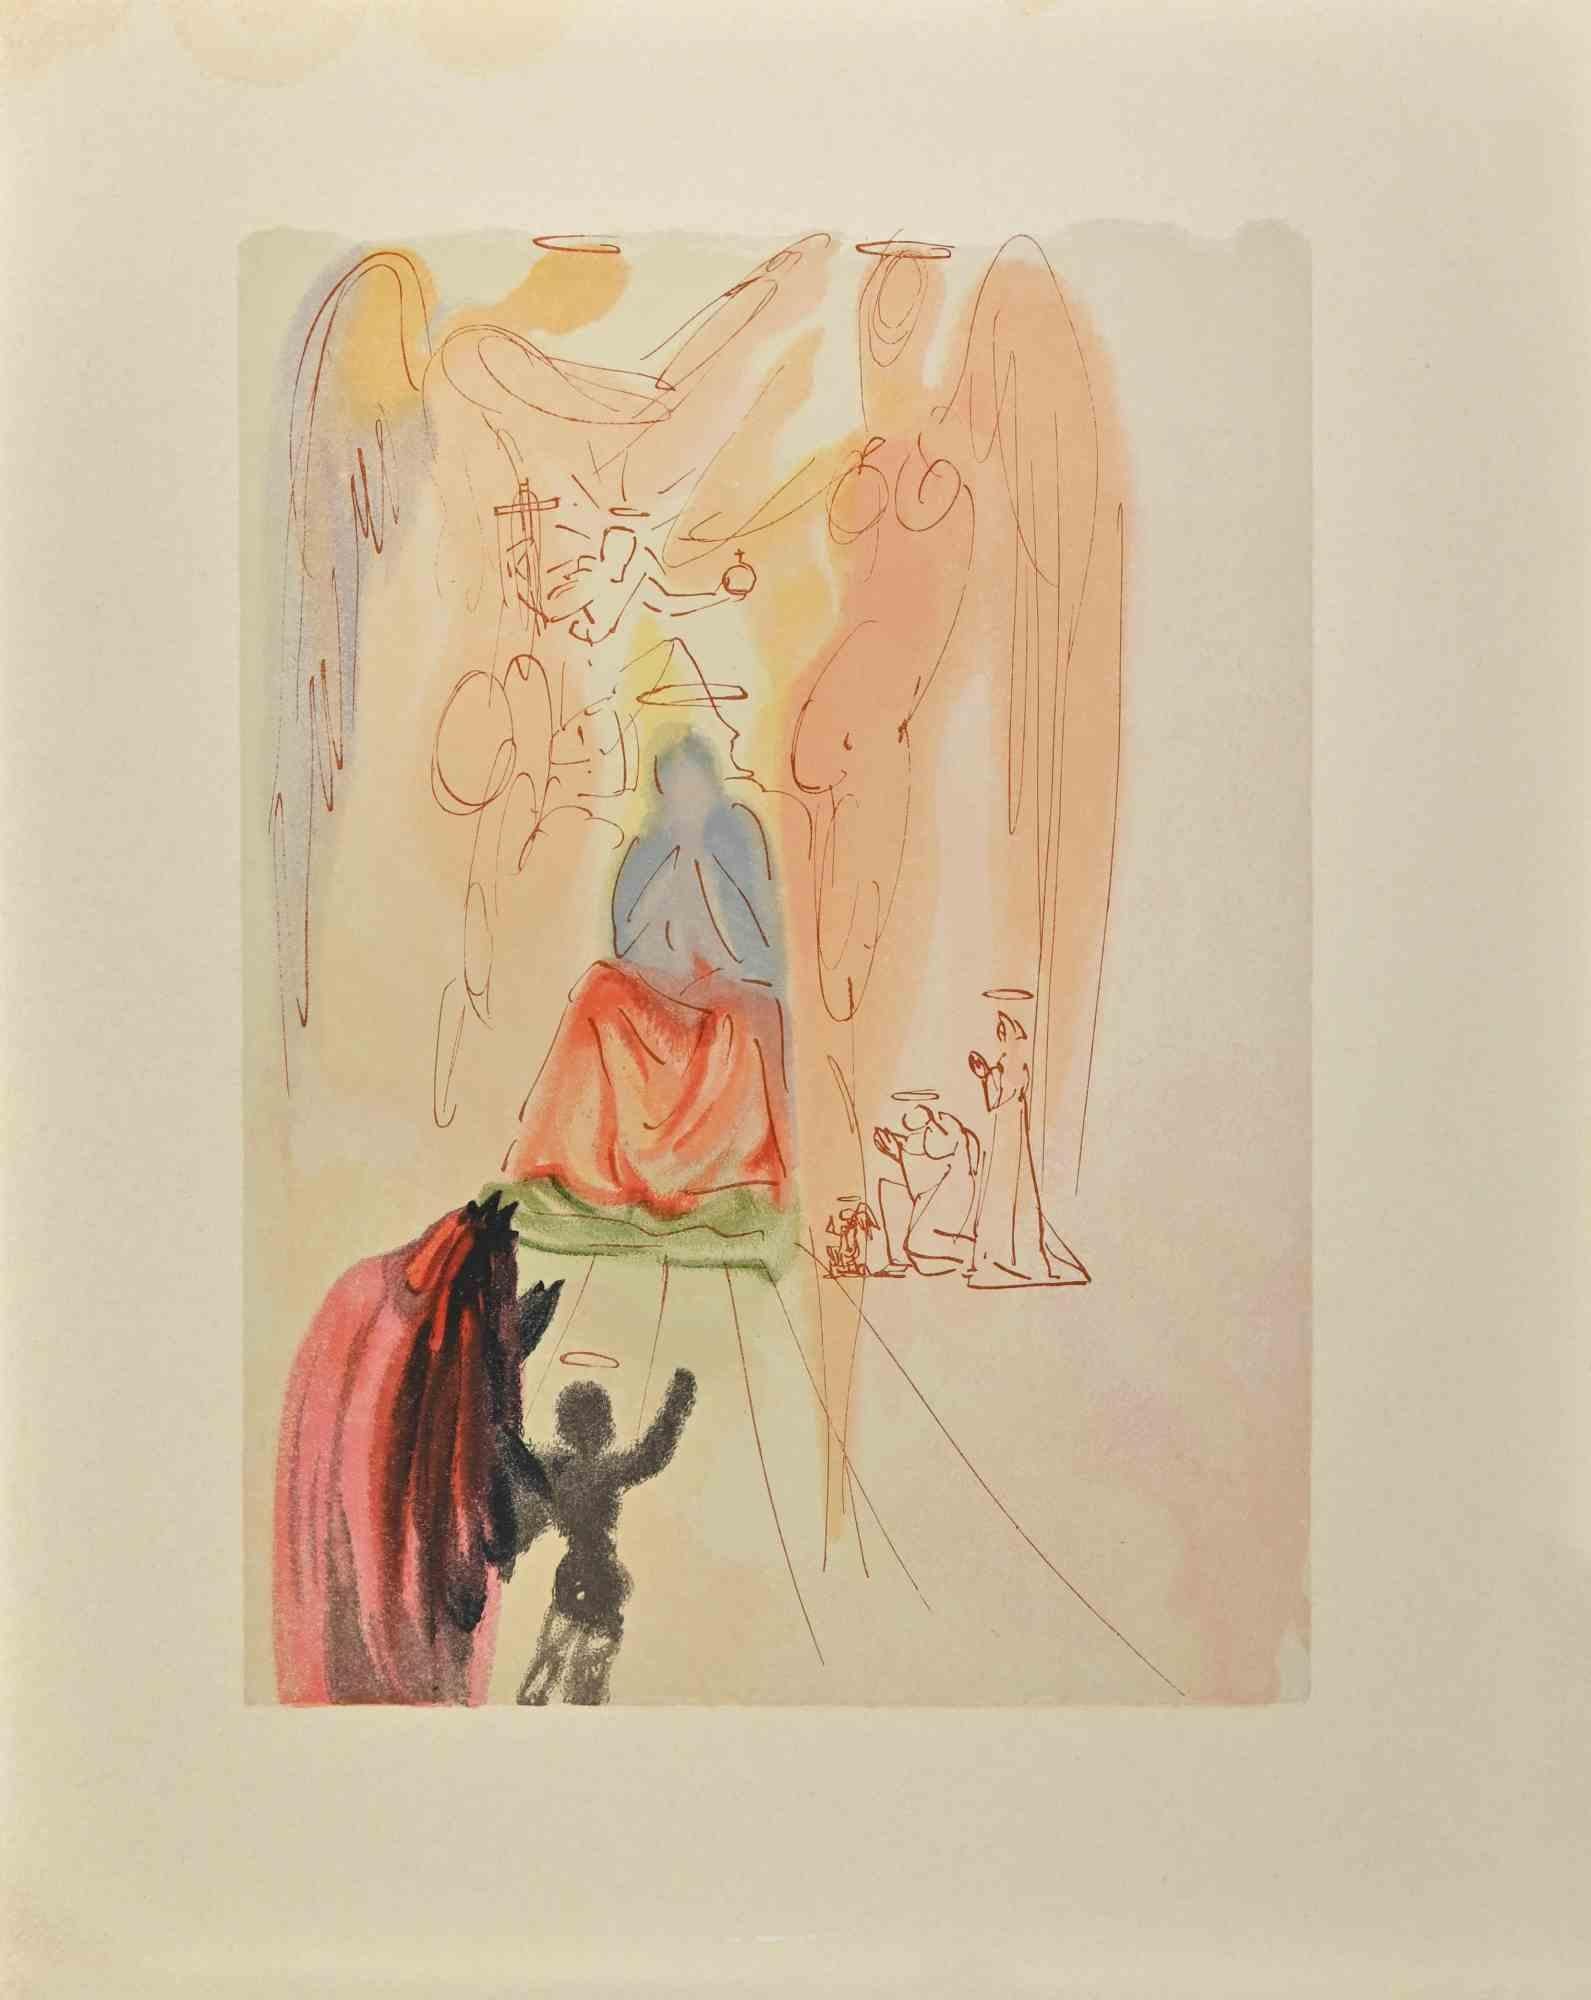 Salvador Dalí Figurative Print - Beatrice and the Triumph of the Saints - Woodcut attr. to Salvador Dali- 1963